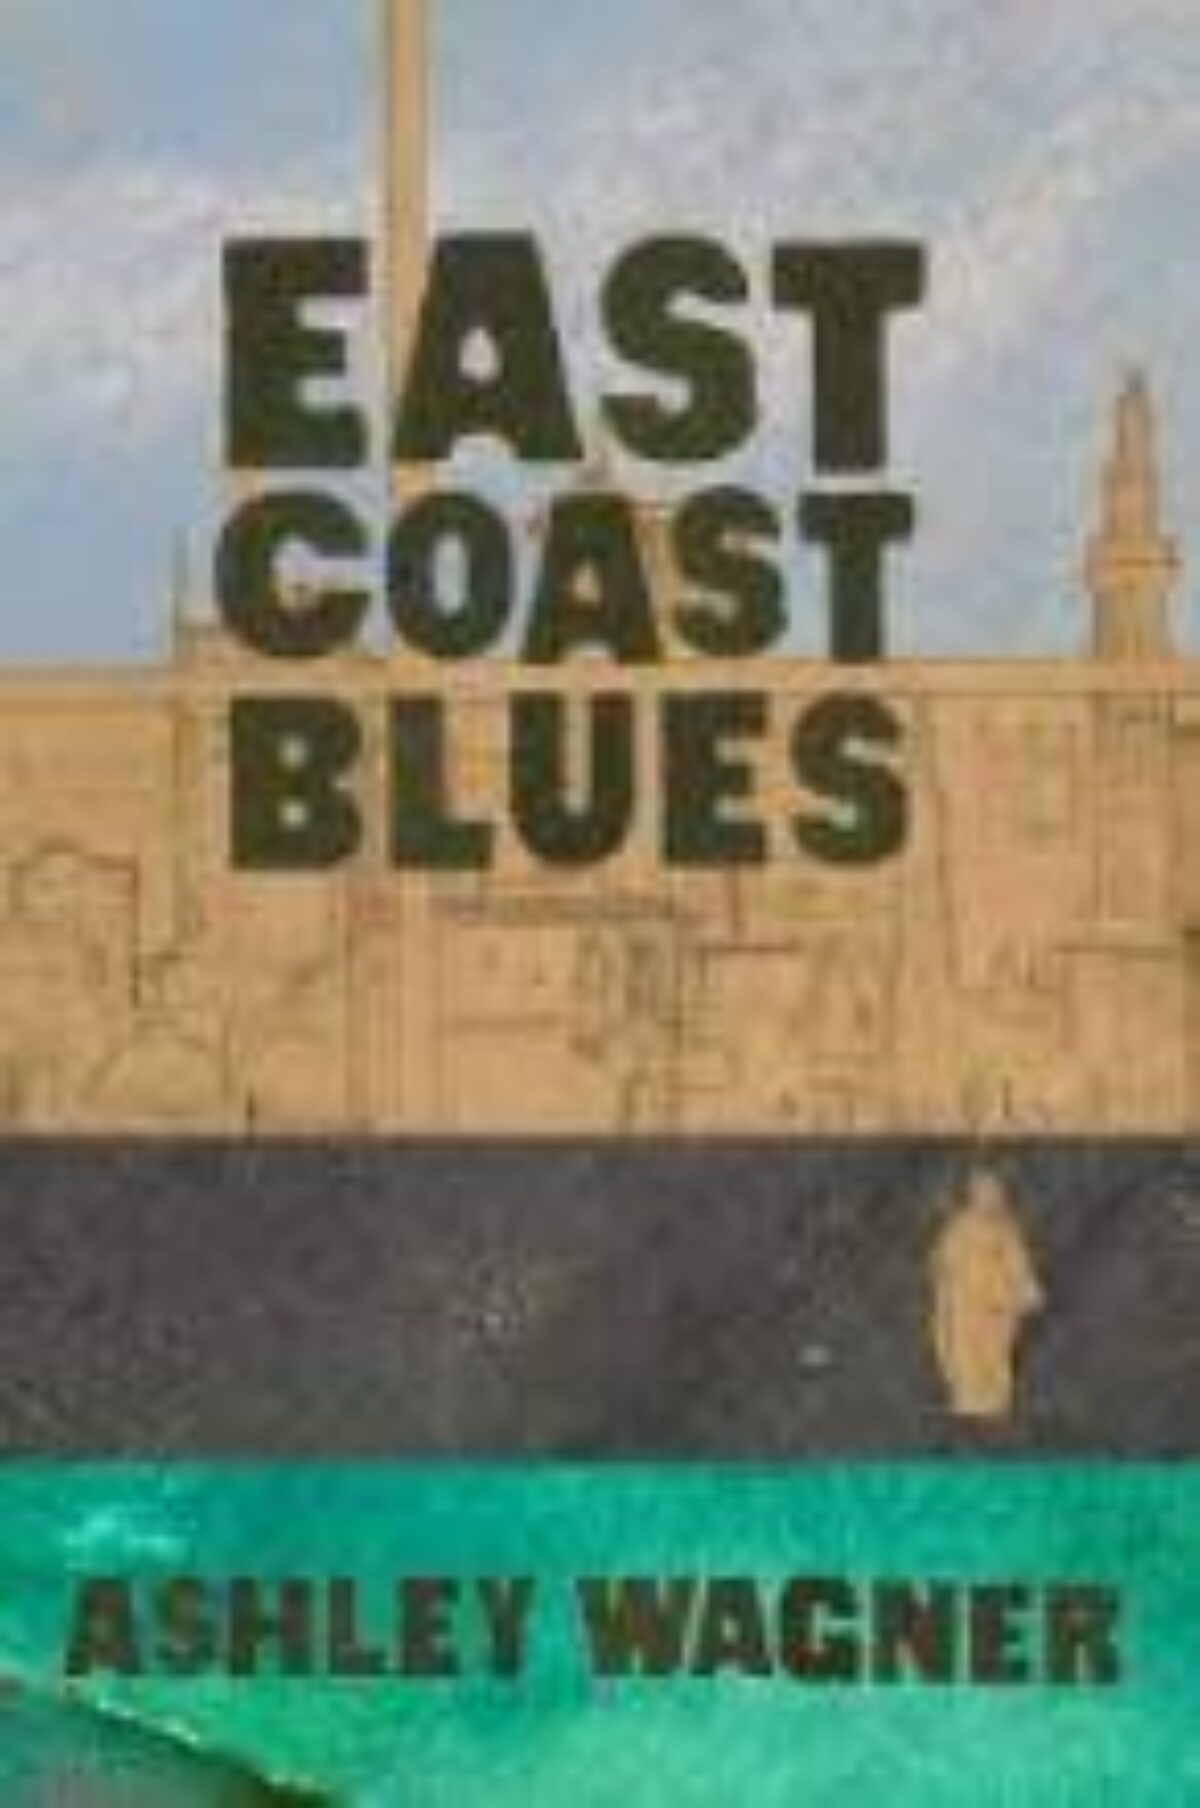 A Panel Of Readers In Celebration Of Ashley Wagner's EAST COAST BLUES